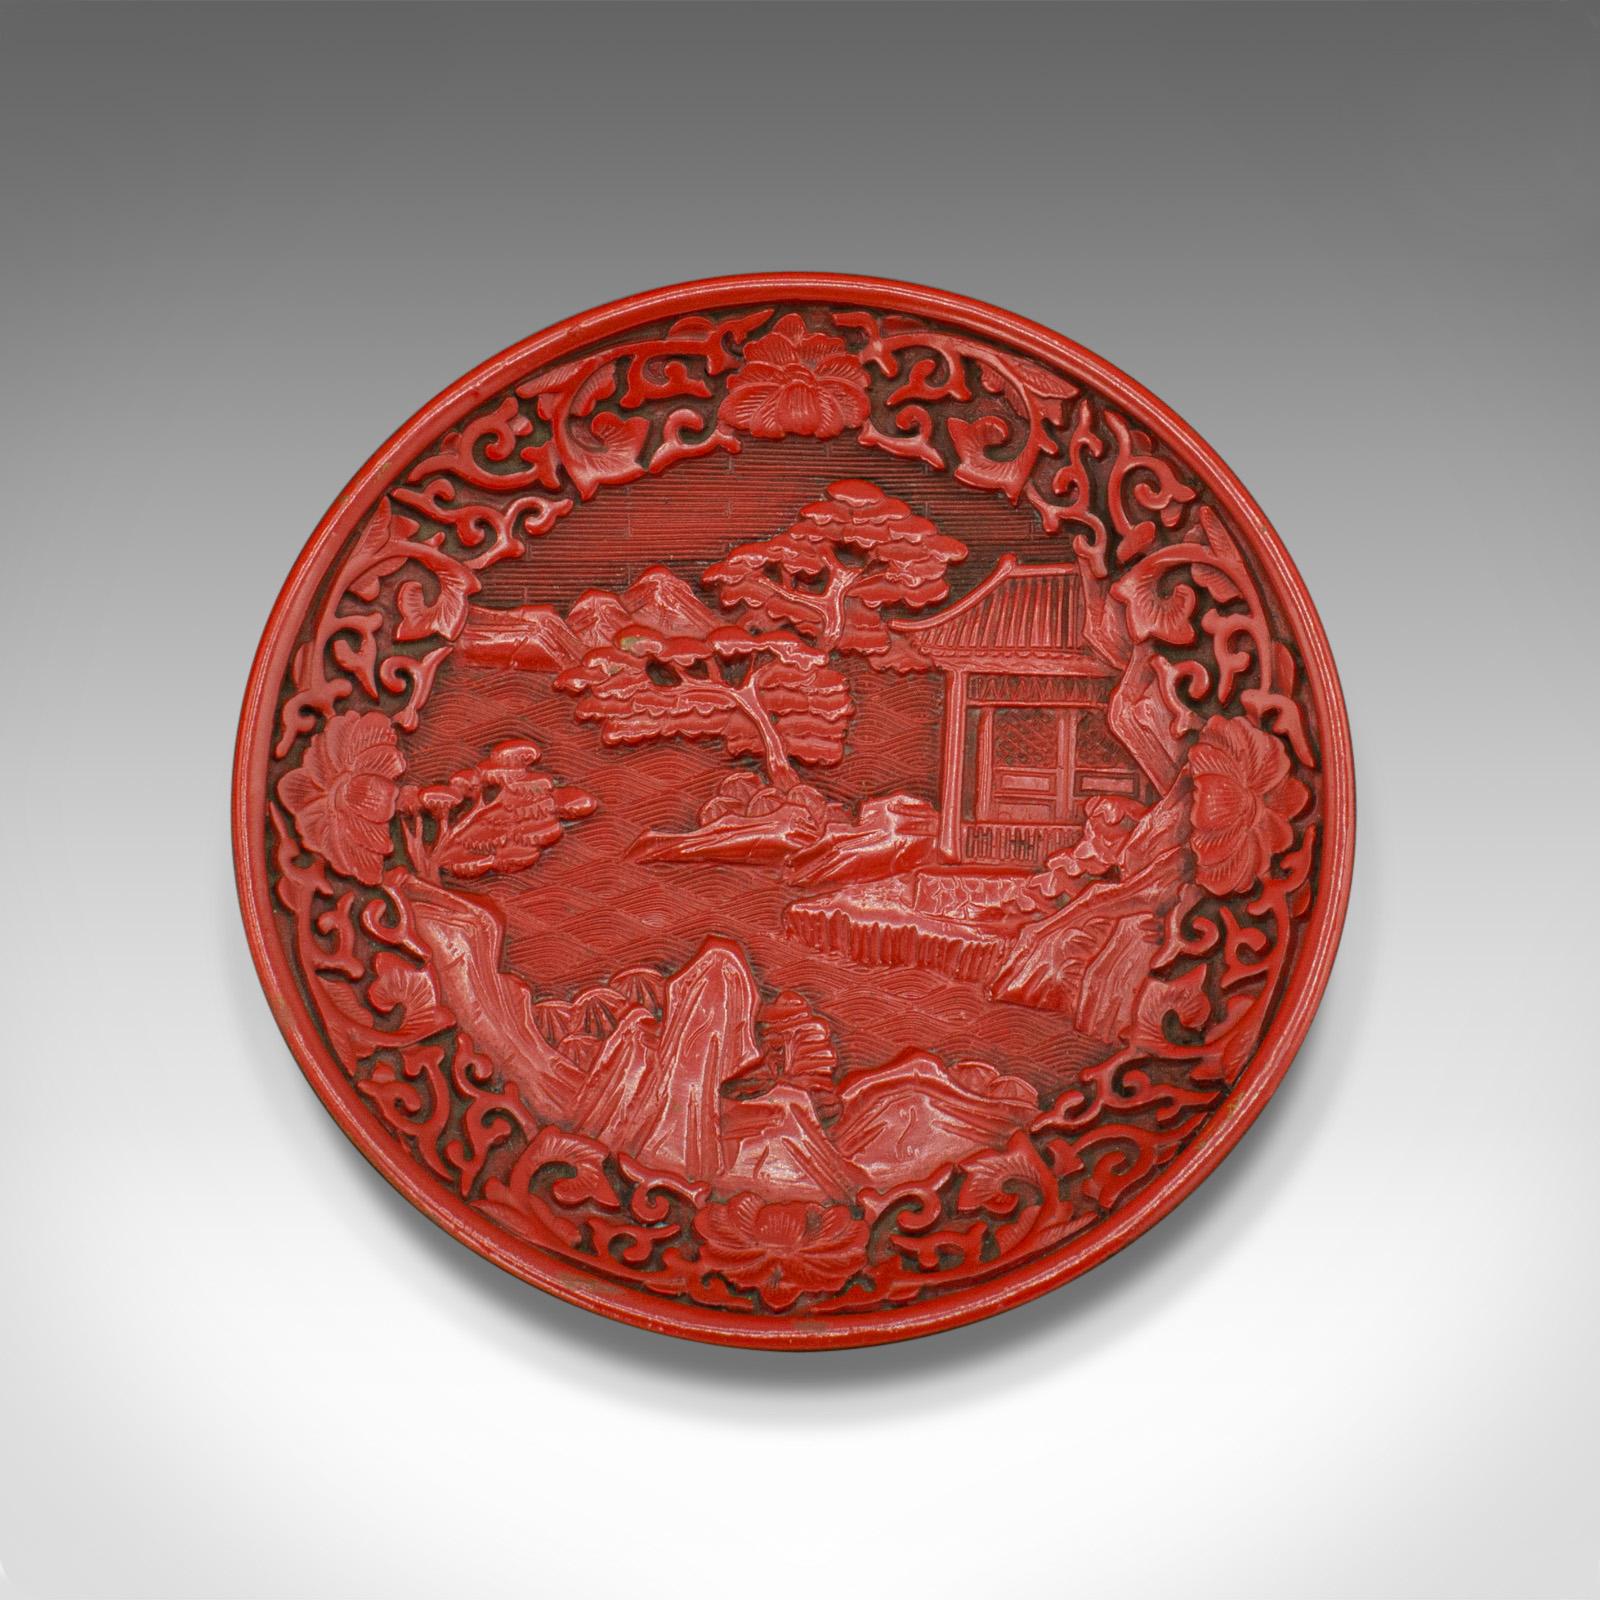 Small Antique Decorative Cinnabar Dish, Chinese, Display Plate, Qing, Victorian In Good Condition For Sale In Hele, Devon, GB